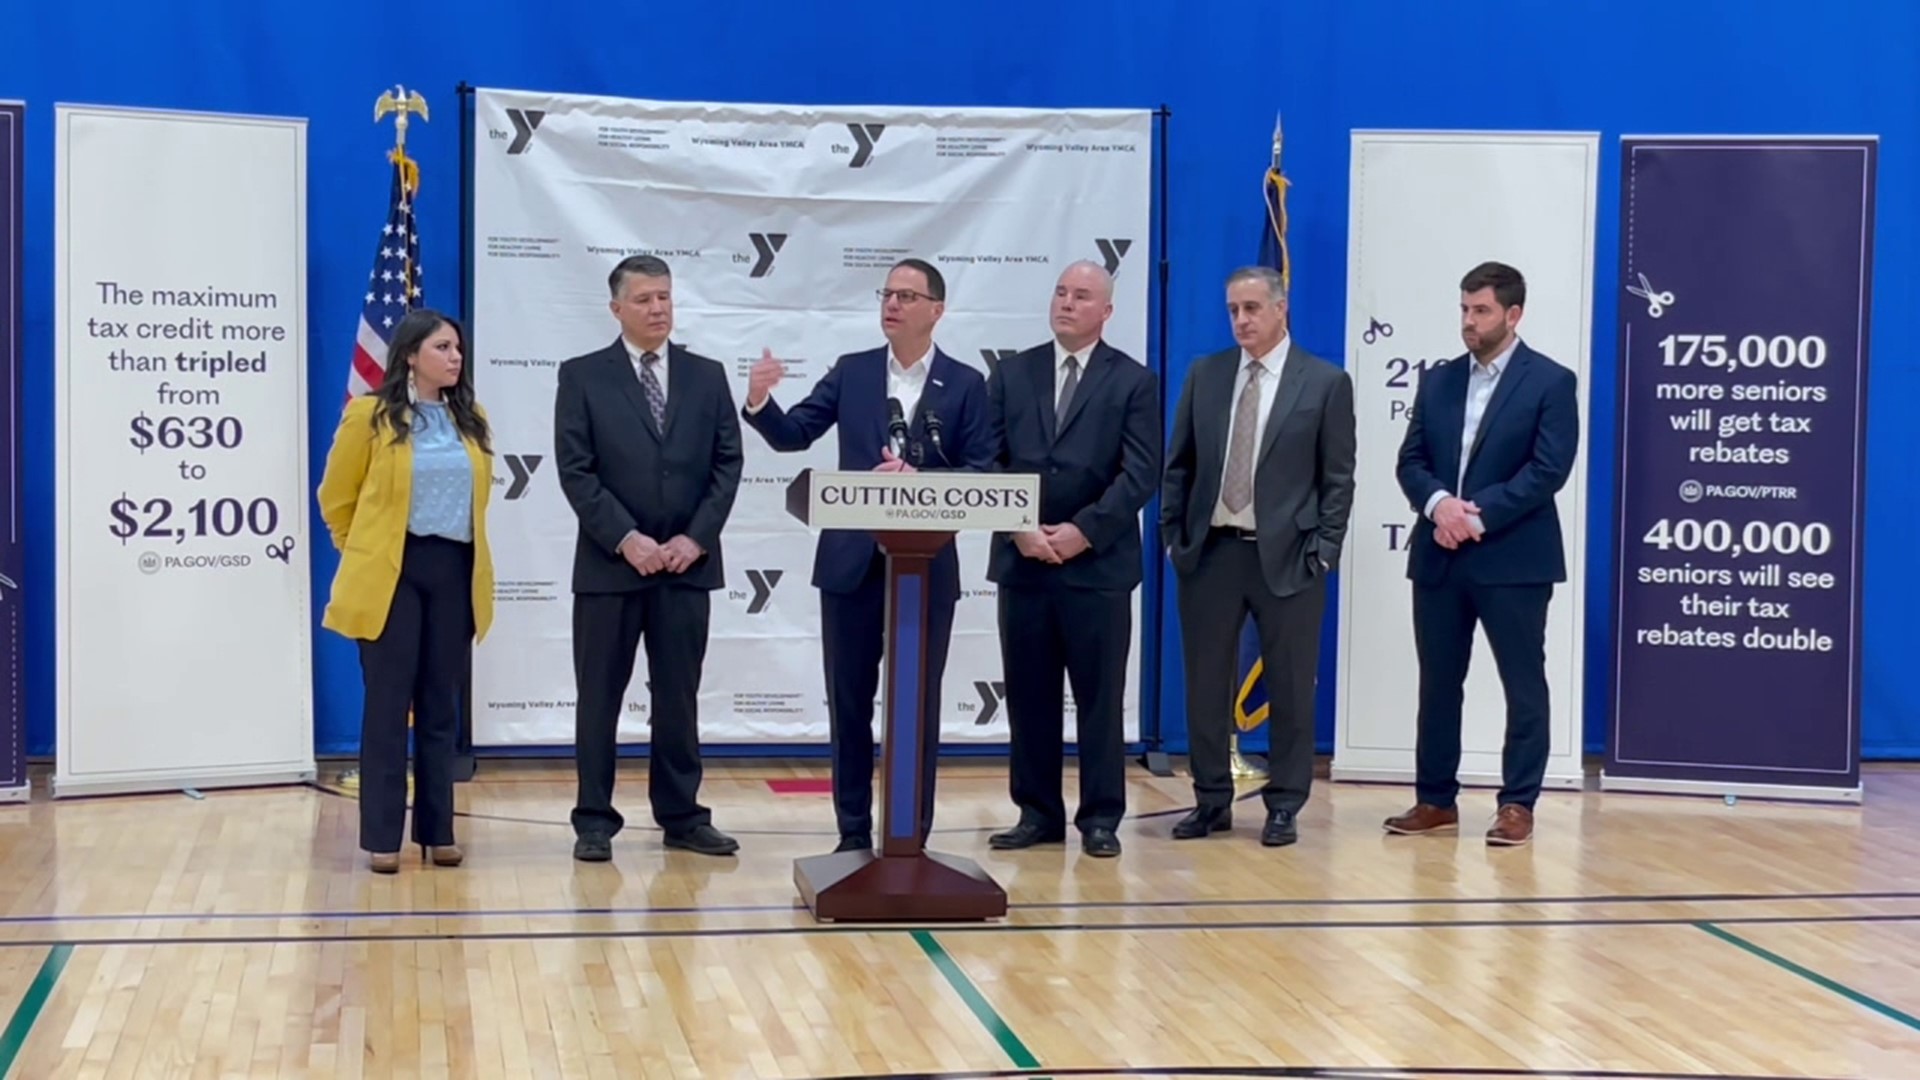 The Governor and area lawmakers visited a daycare to highlight the administration's expansion of the state's child tax credit.